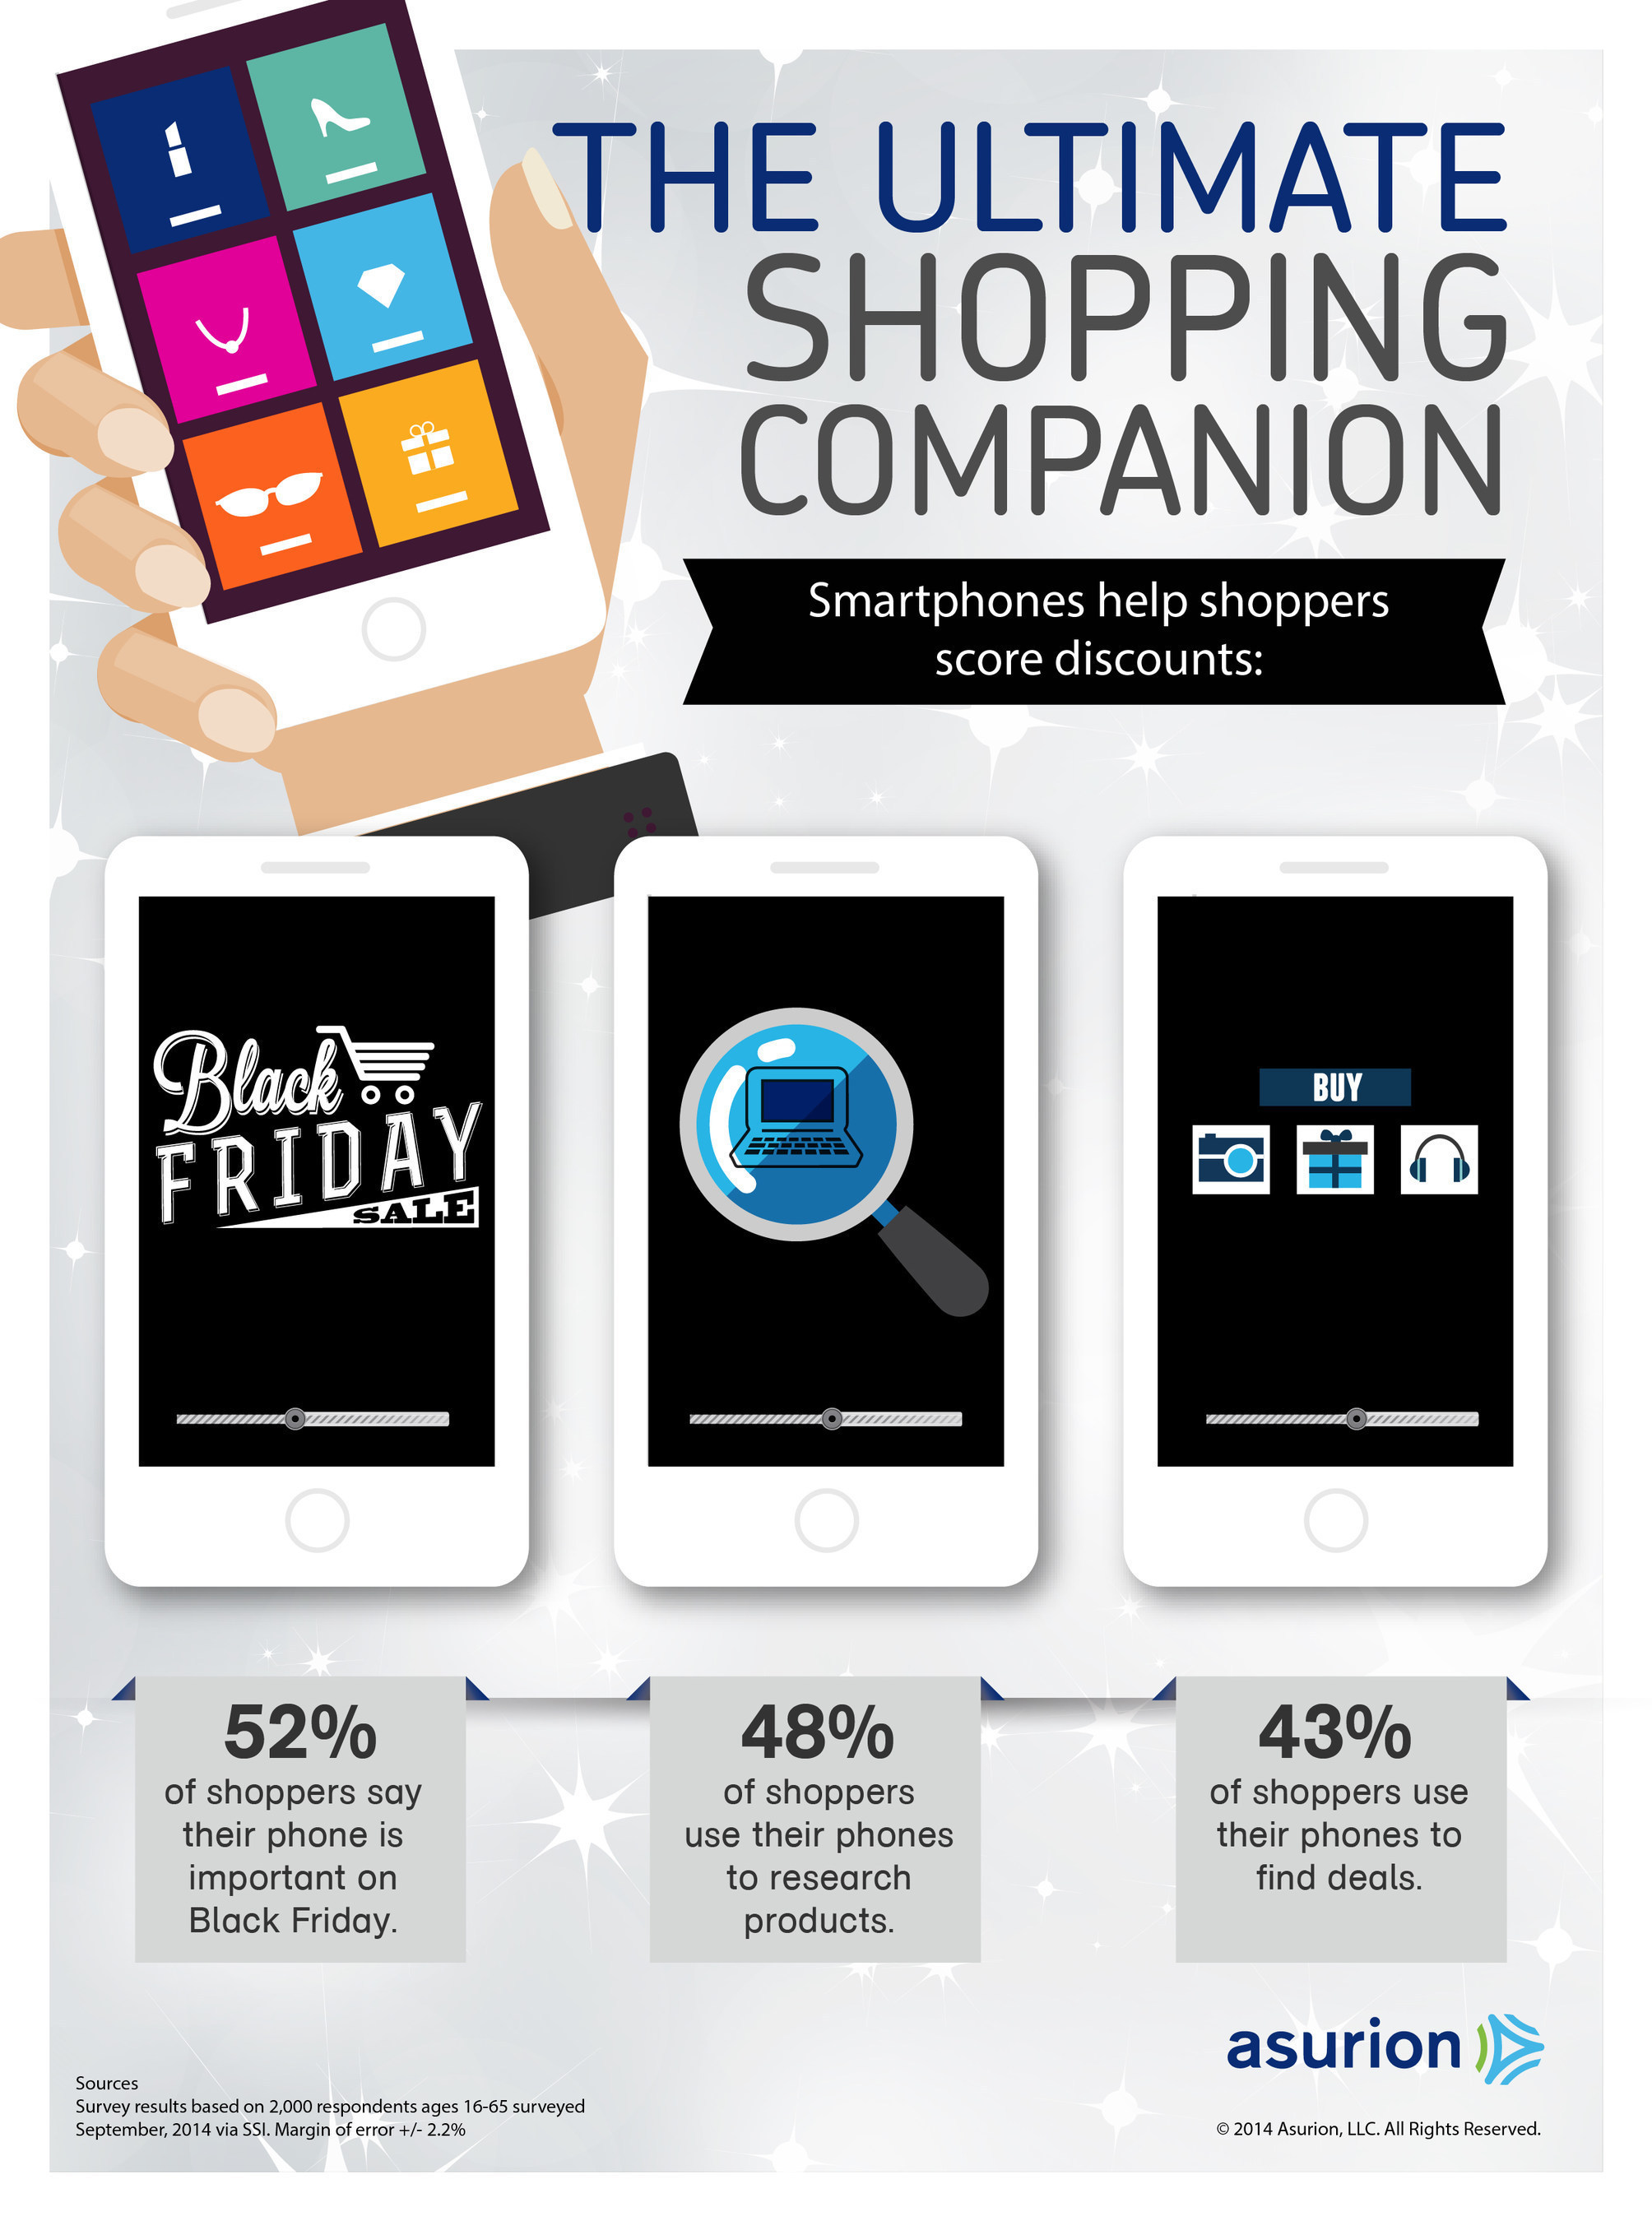 Black Friday shoppers this year will rely on their mobile phones to research products and find deals according to a new survey from product protection leader Asurion. Find out more about holiday trends at http://blog.asurion.com/tag/holiday-2014/.